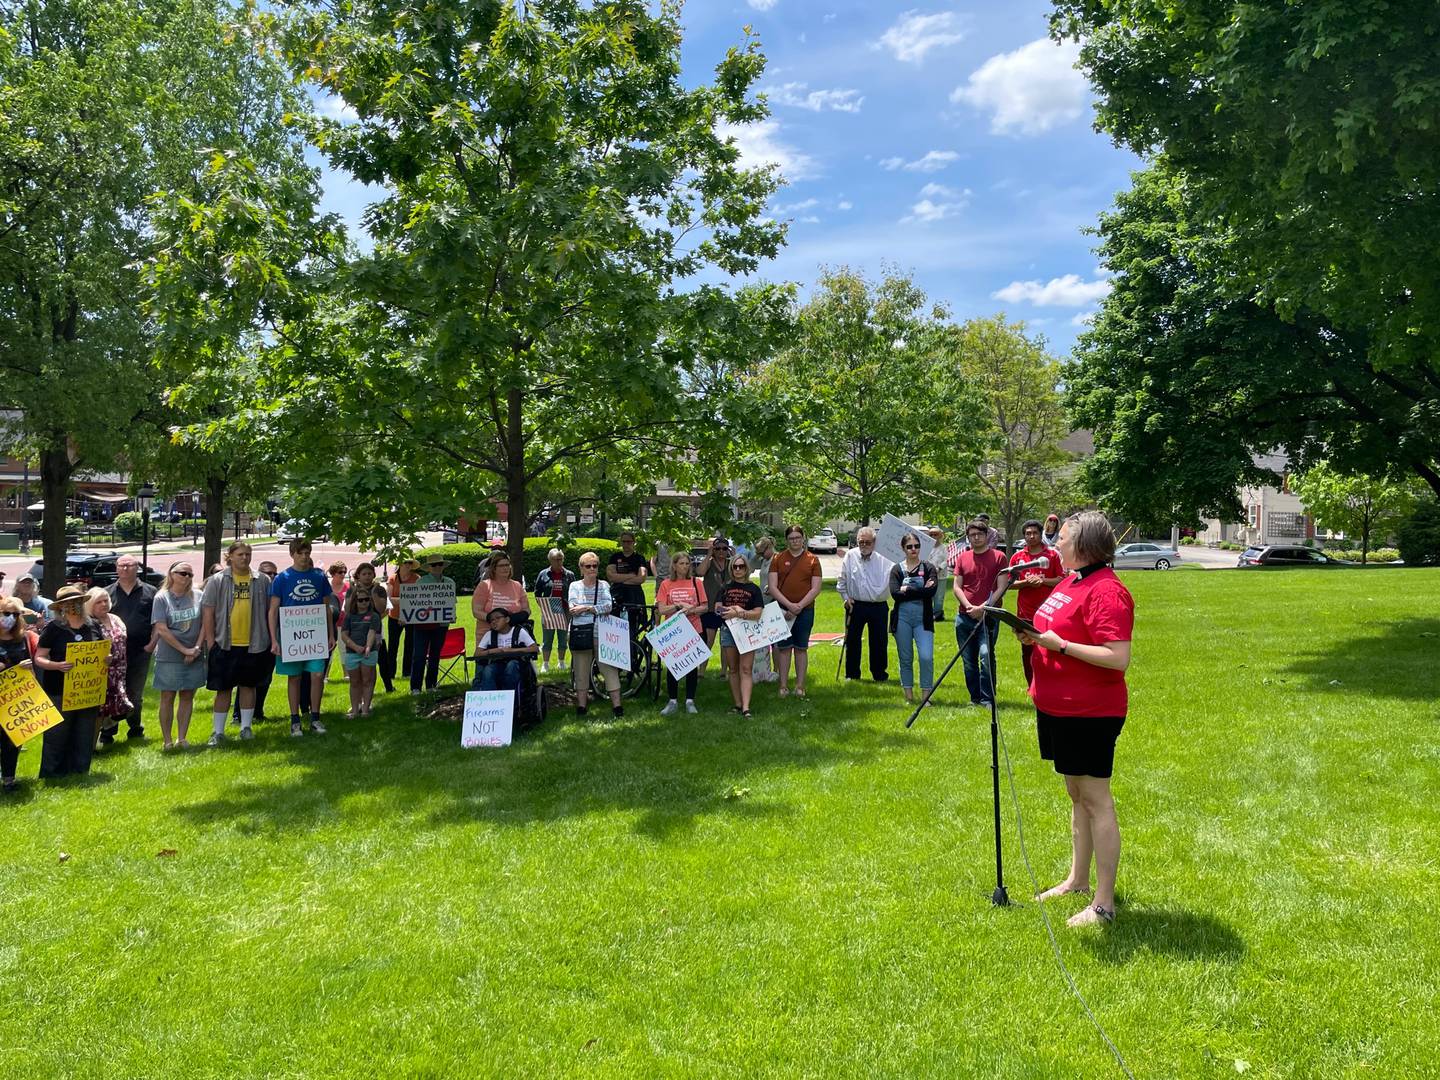 Stephanie Anthony, pastor of Fox Valley Presbyterian Church, reads aloud the names of the 21 victims of the Uvalde, Texas school shooting at a rally against gun violence in Geneva on Saturday.